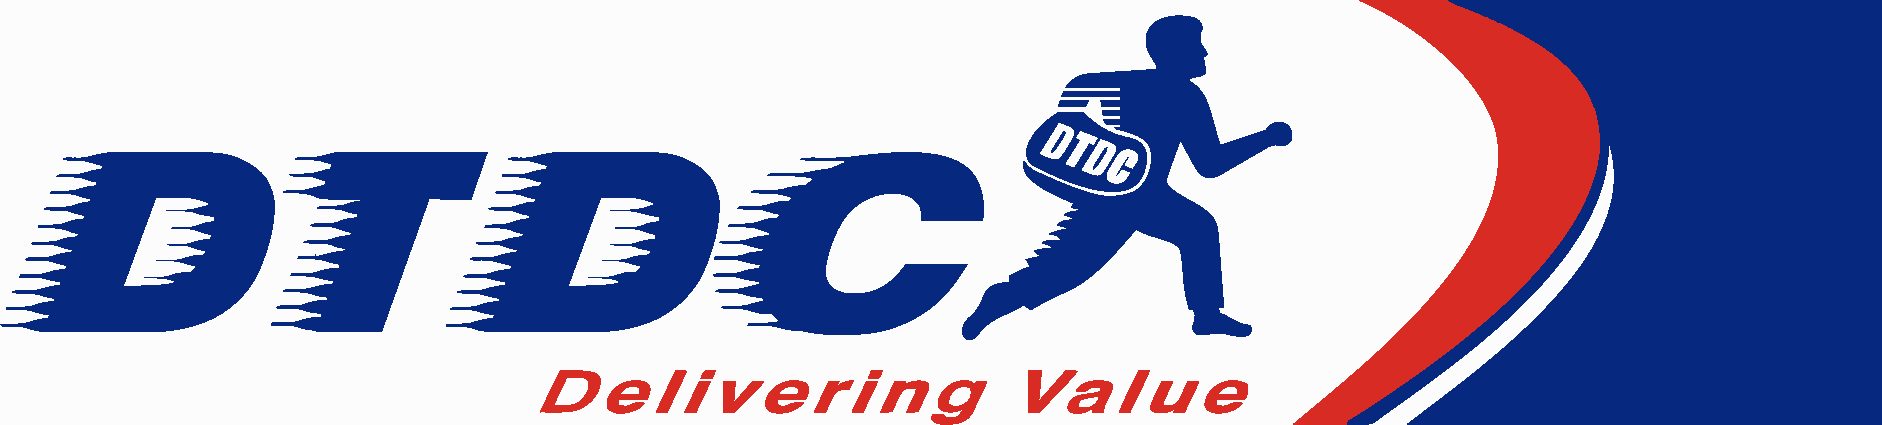 DTDC rebrands to DTDC Express Limited; unveils new logo - MxMIndia-hautamhiepplus.vn